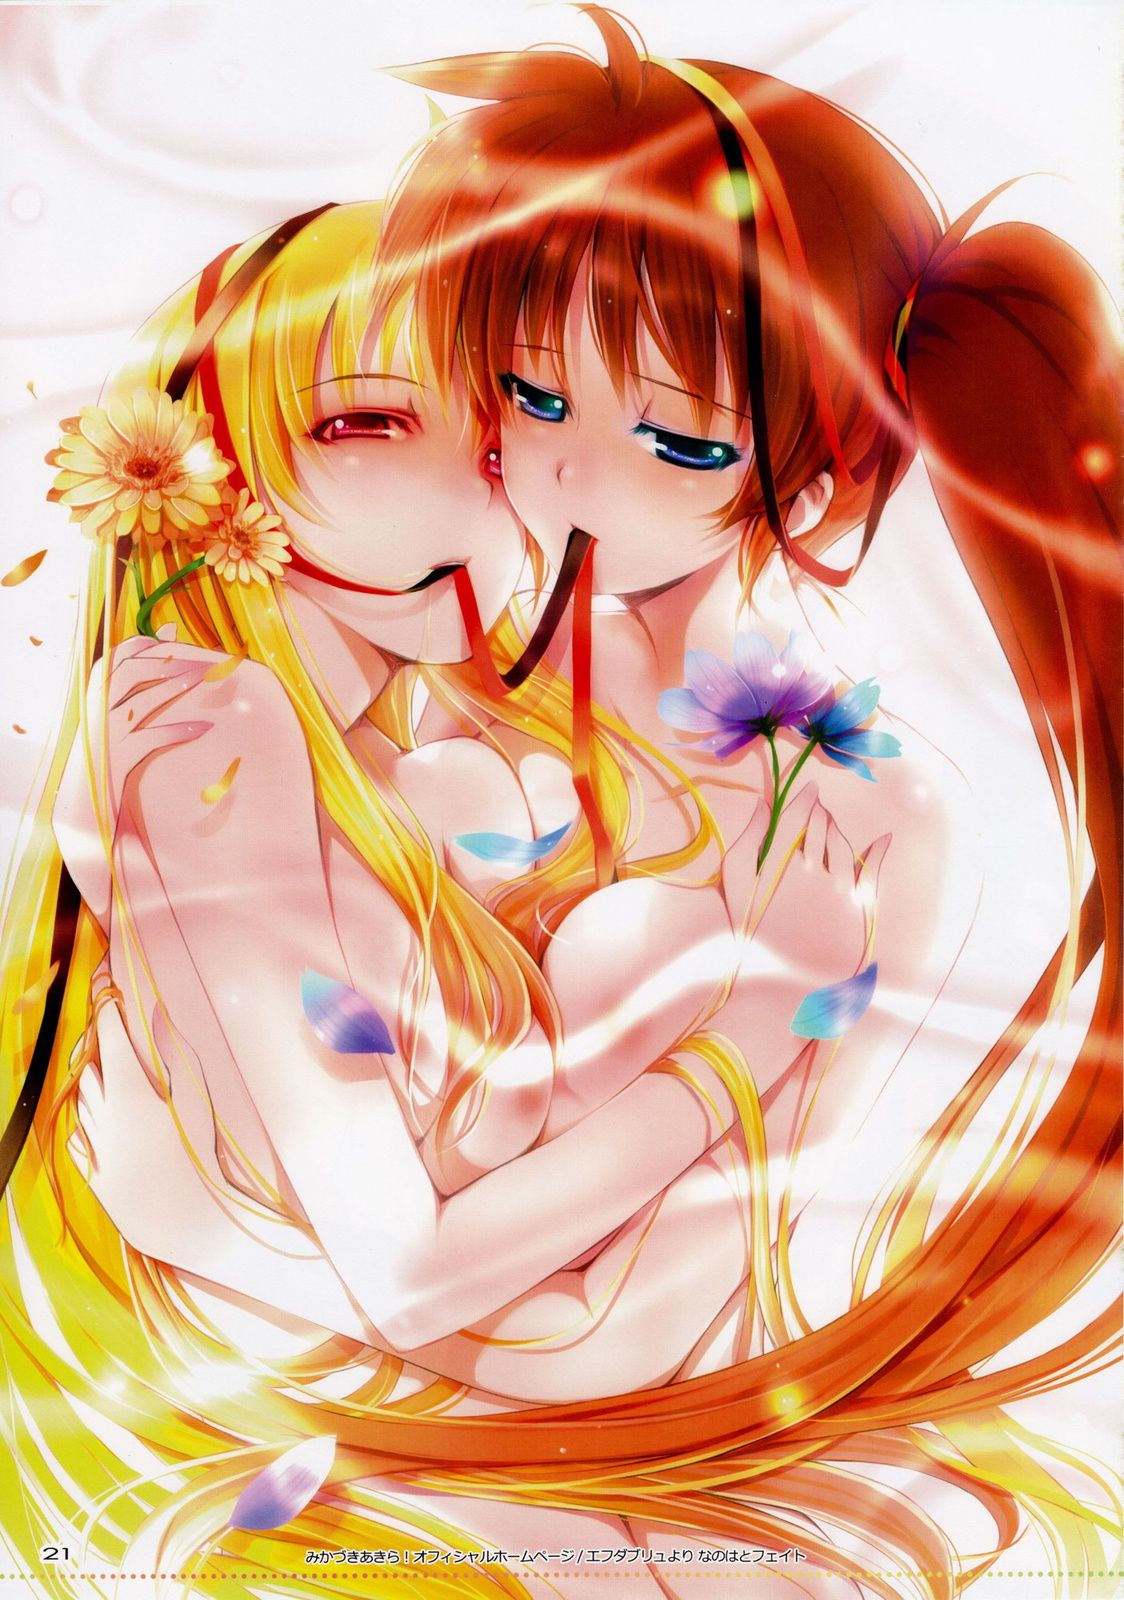 [Magical Girl Lyrical Nanoha] Let's be happy to see the photo of Fate Testarossa! 15